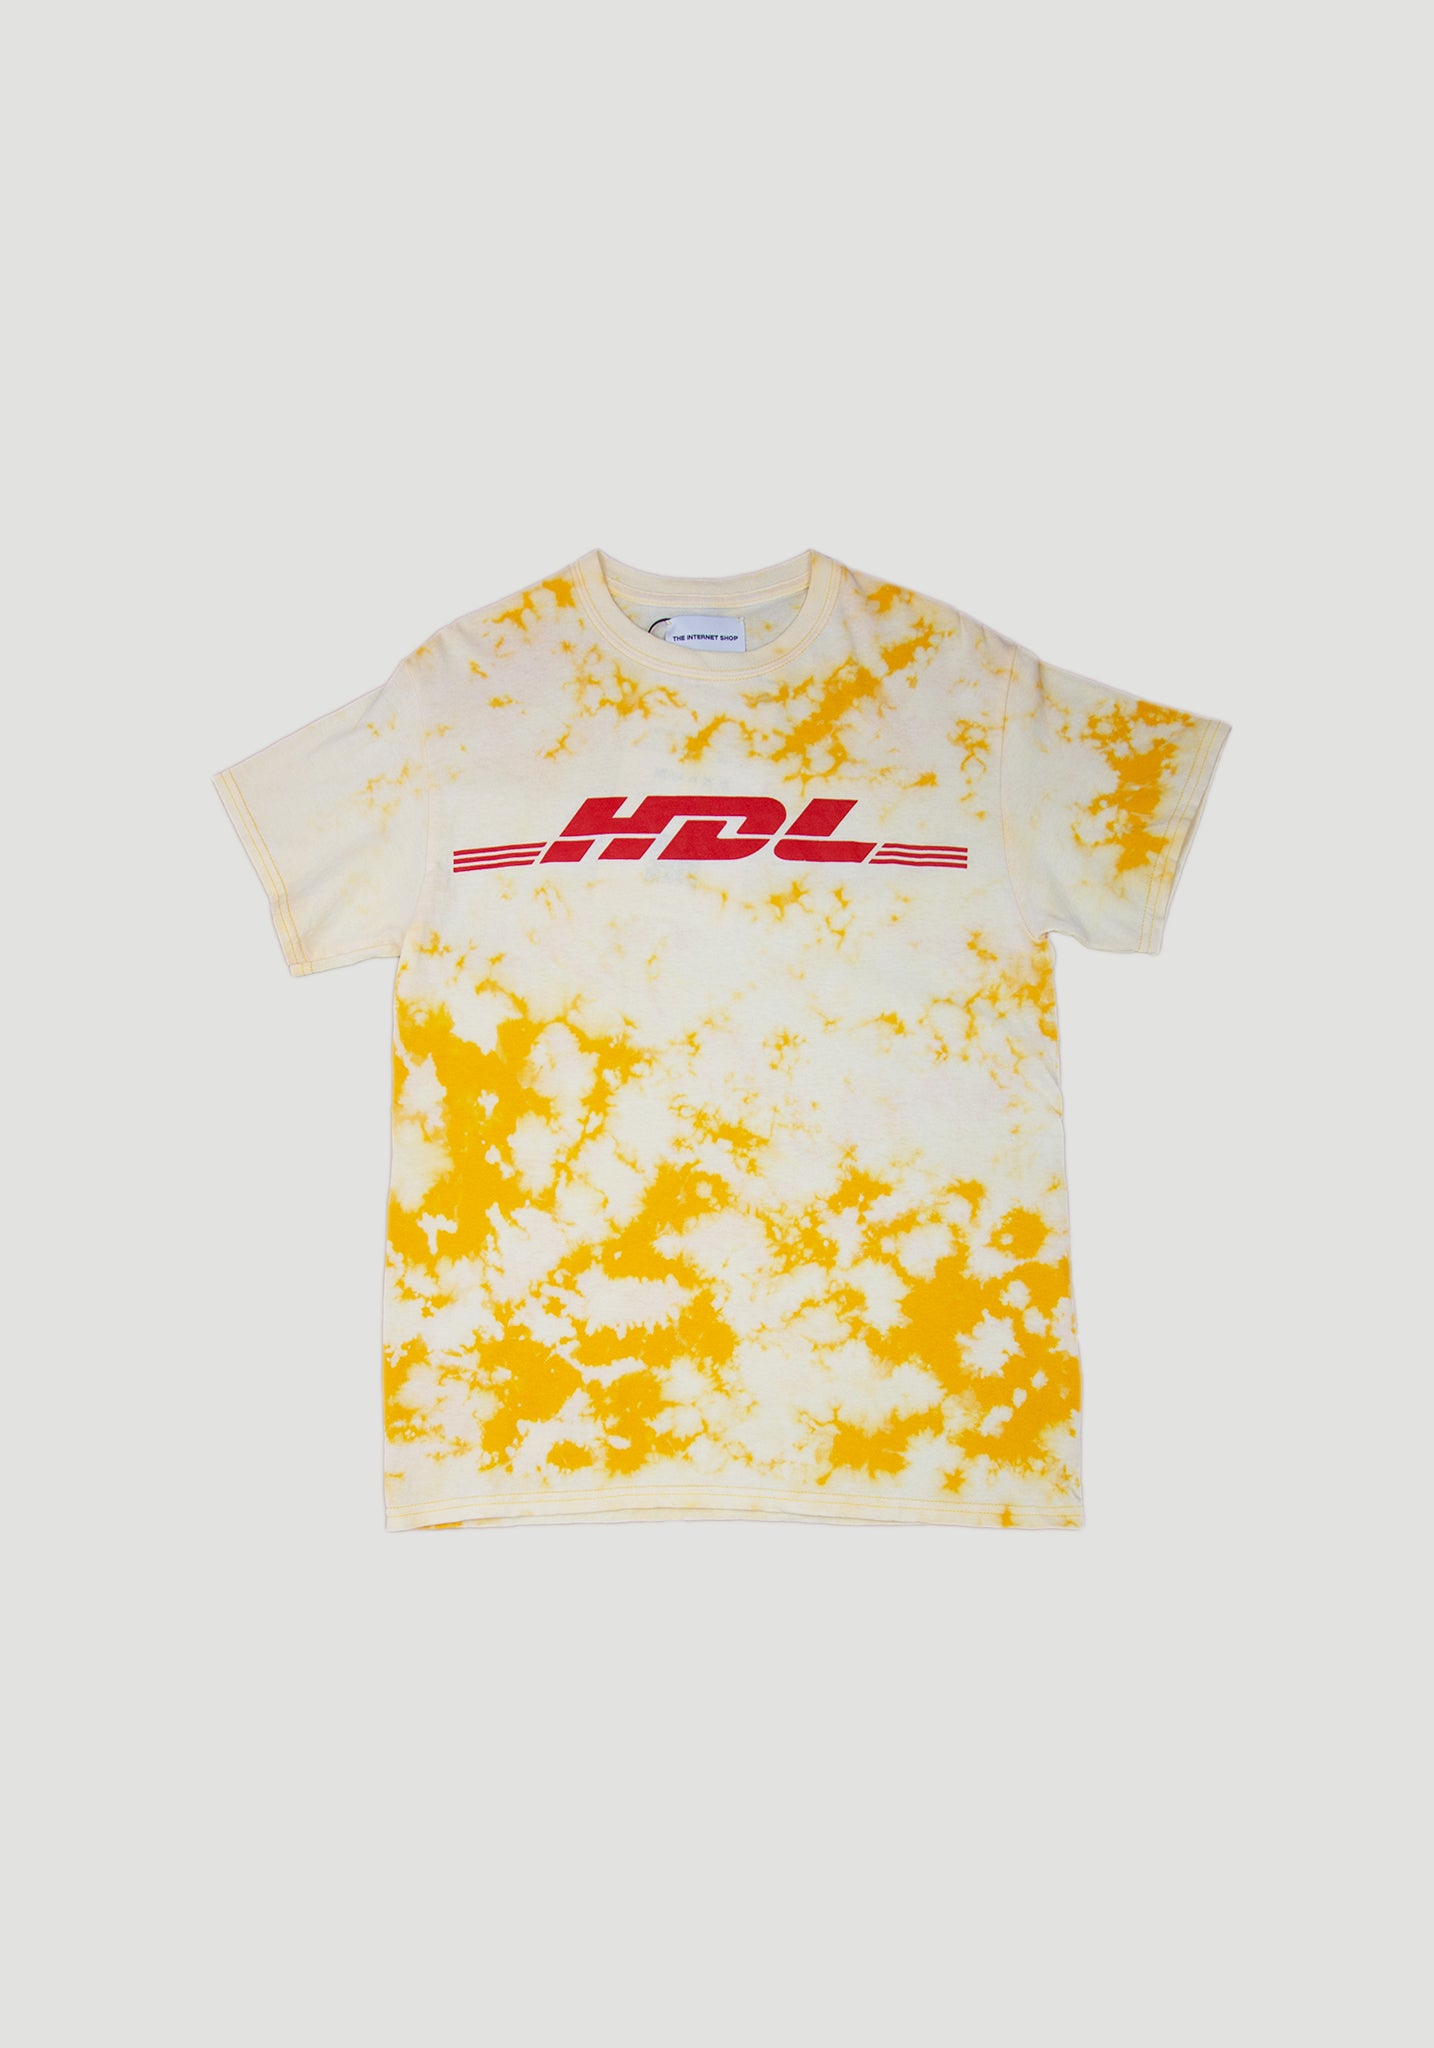 HDL Shirt Sunkissed Edition #01 (S)